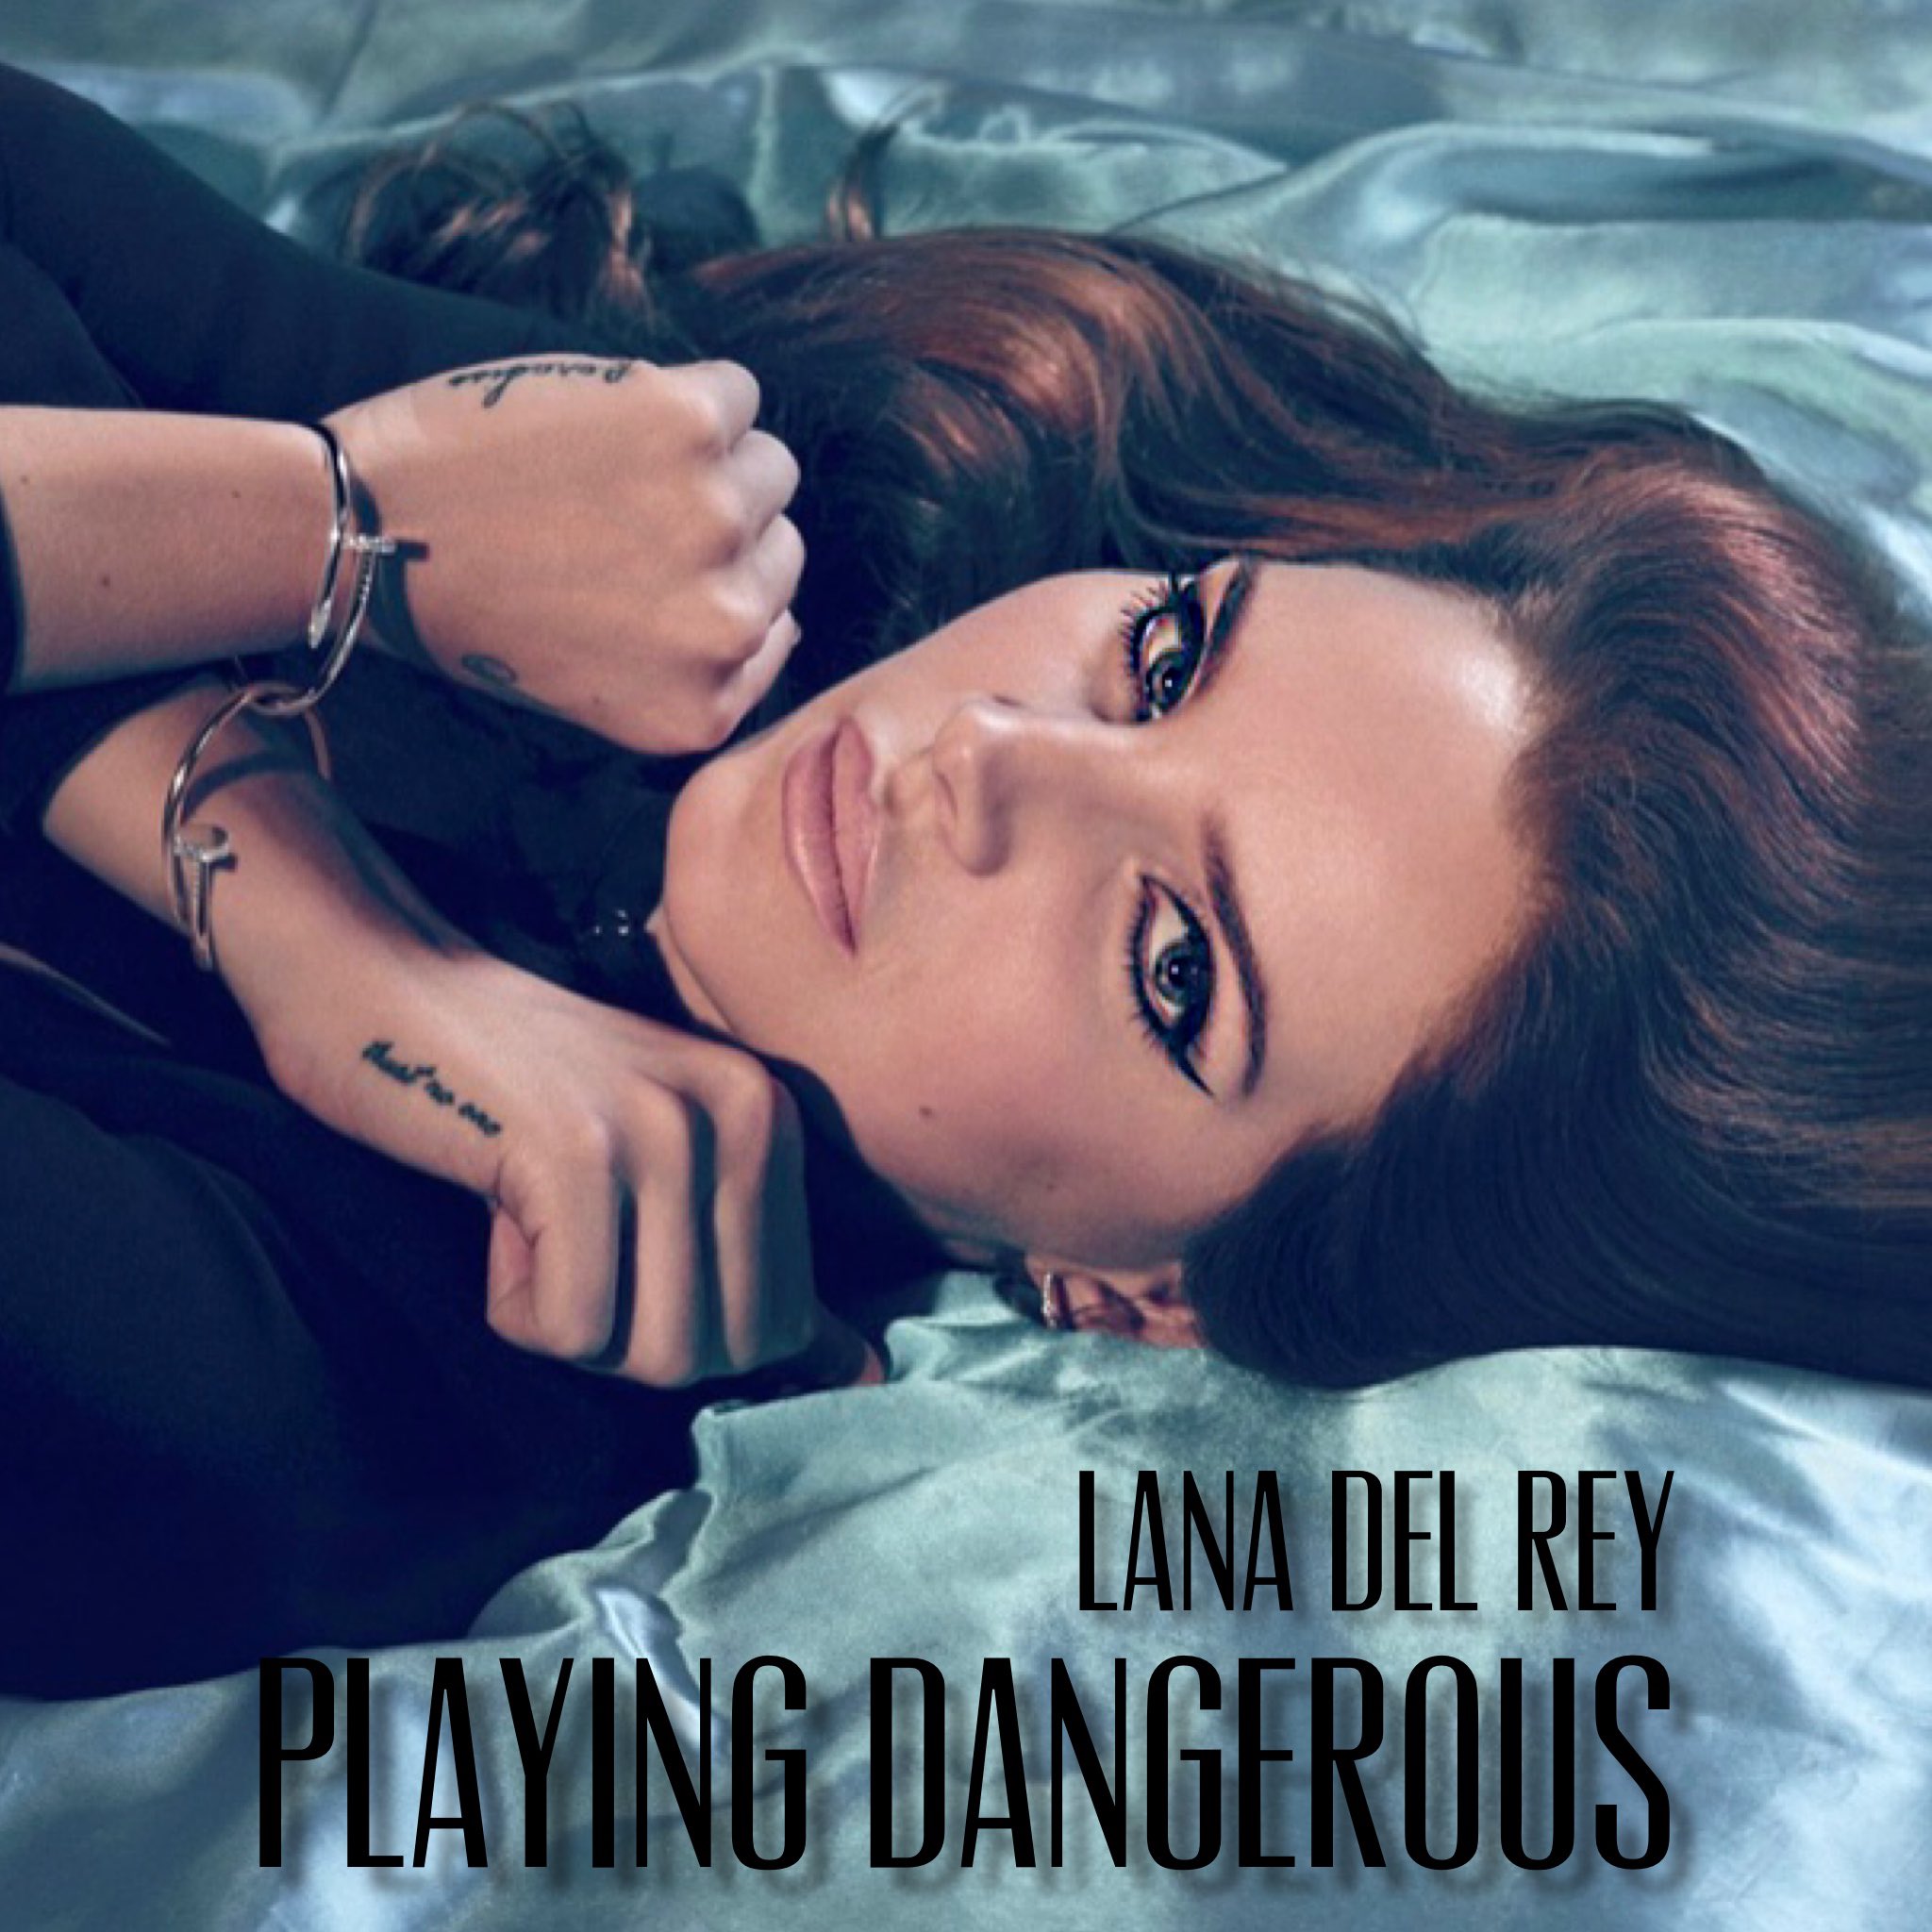 Meaning of Playing Dangerous by Lana Del Rey